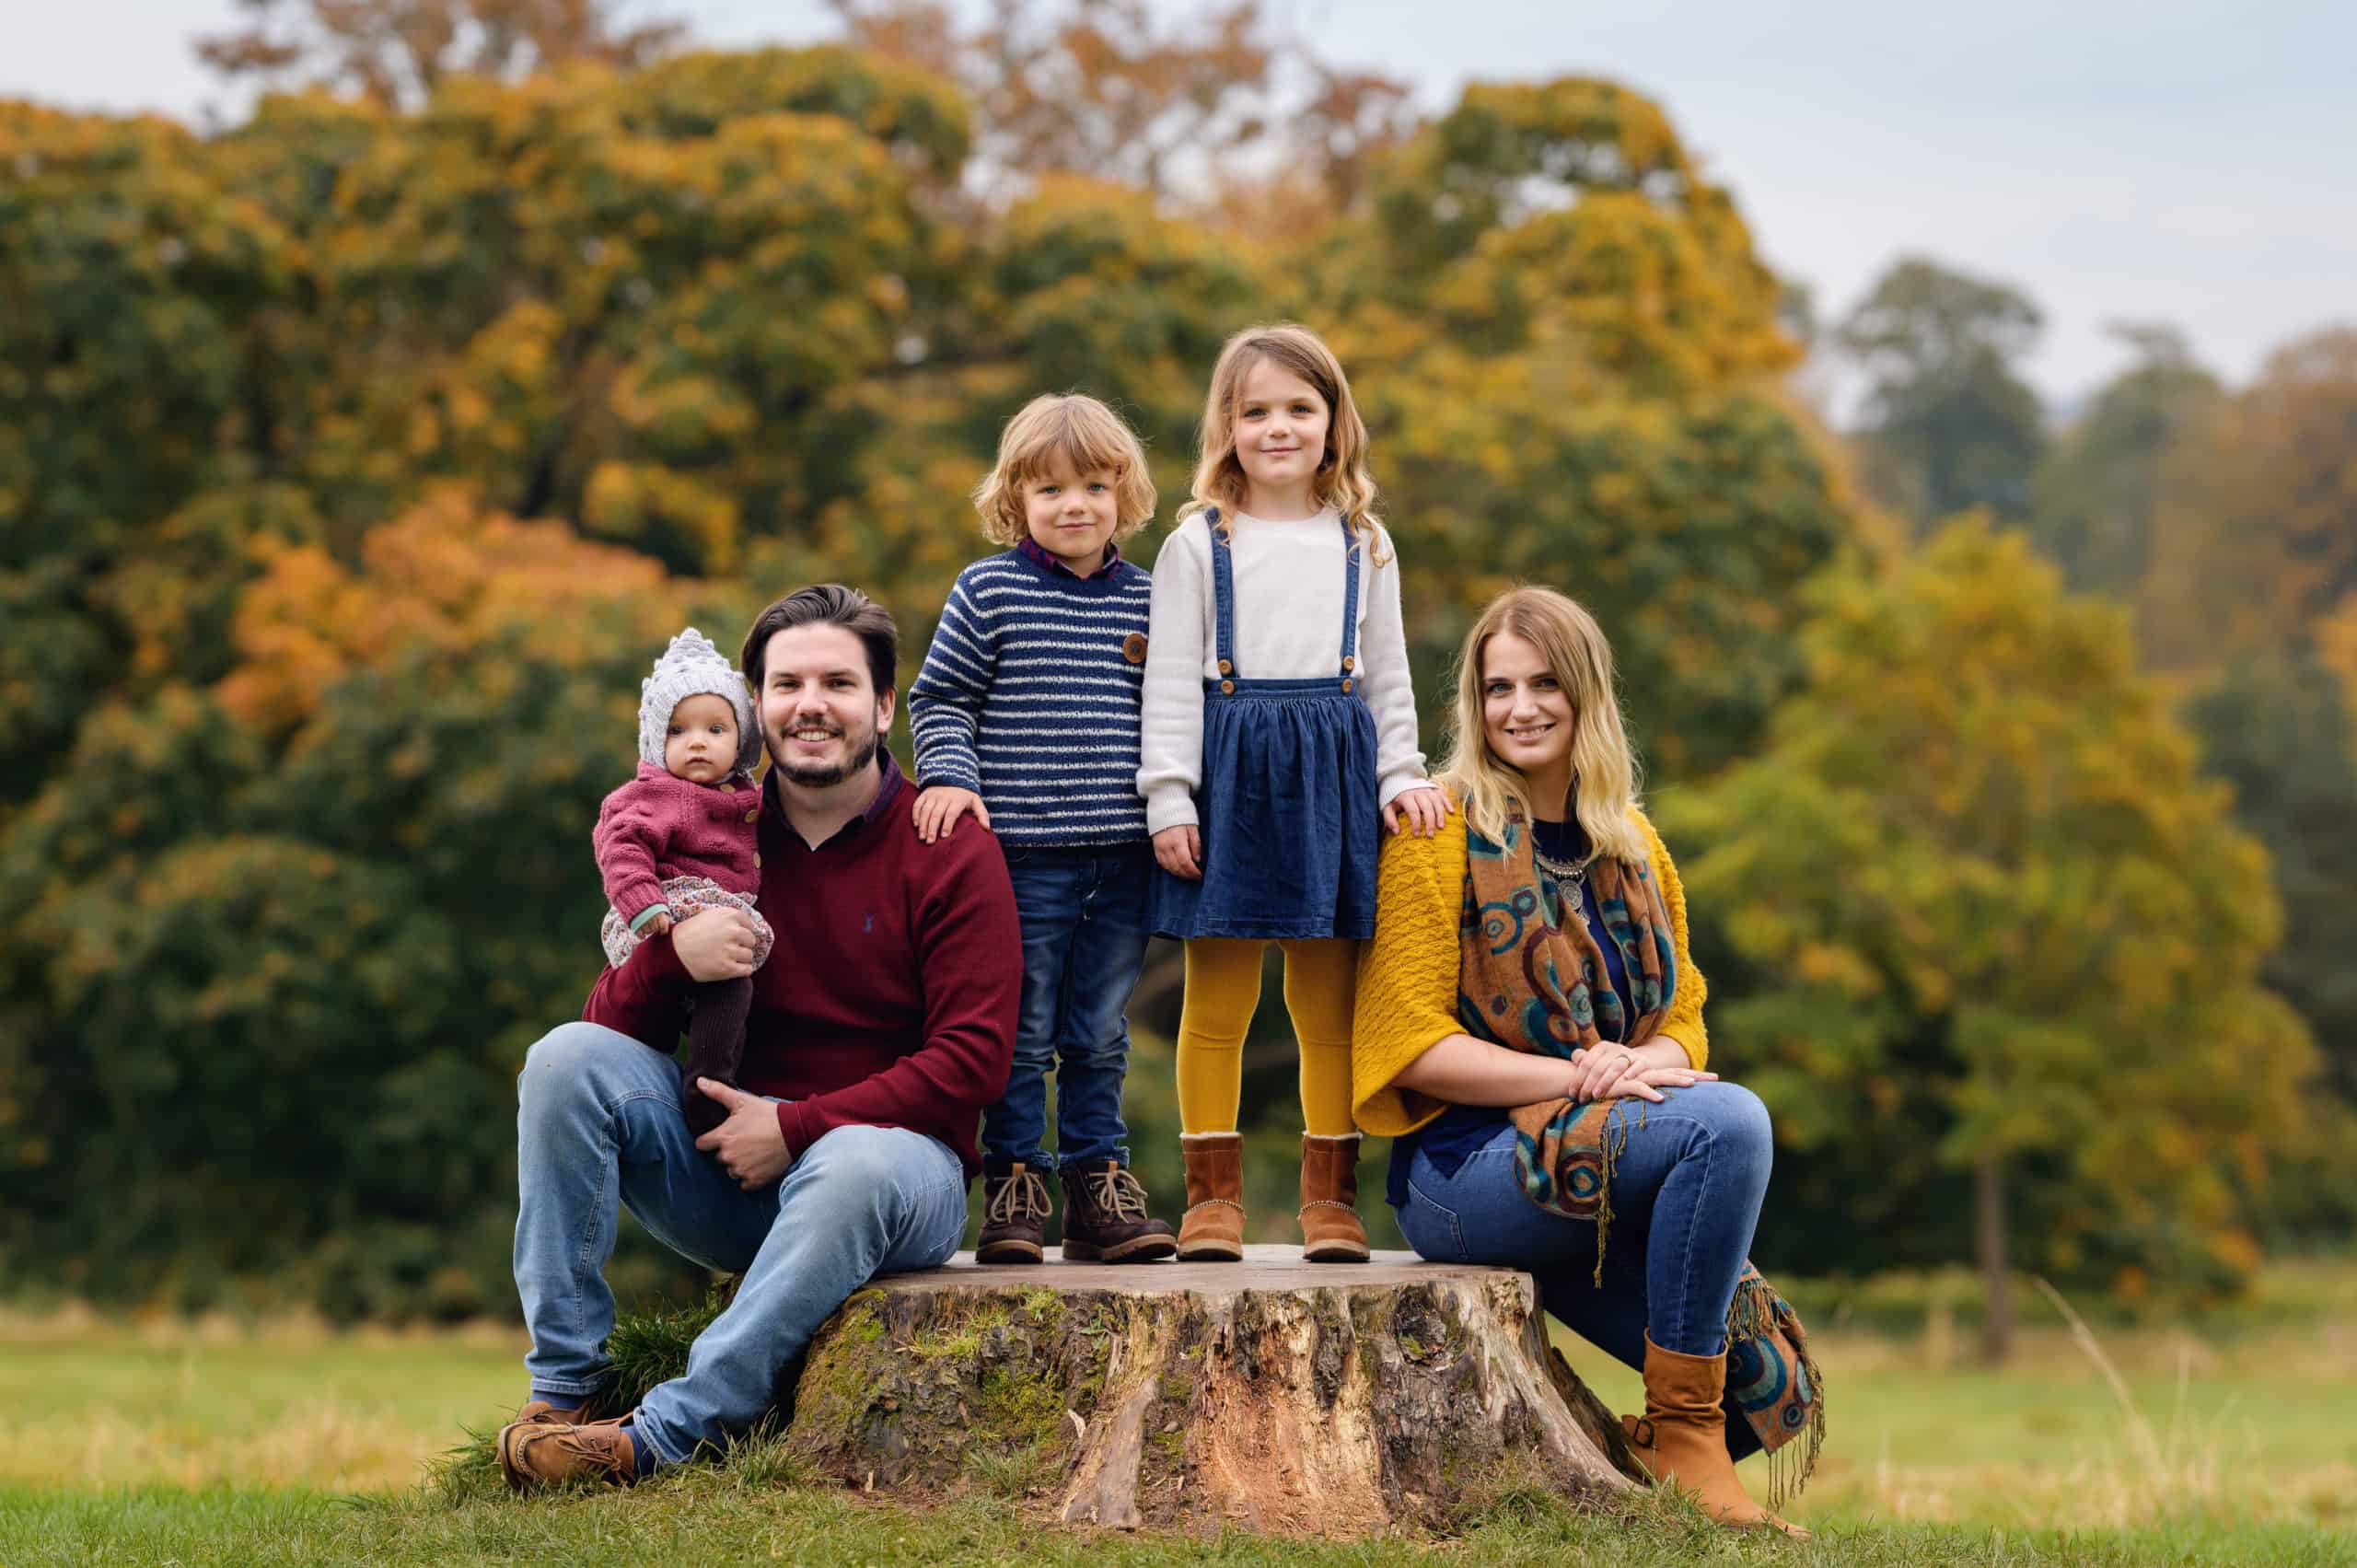 Bristol family photography in Autumn